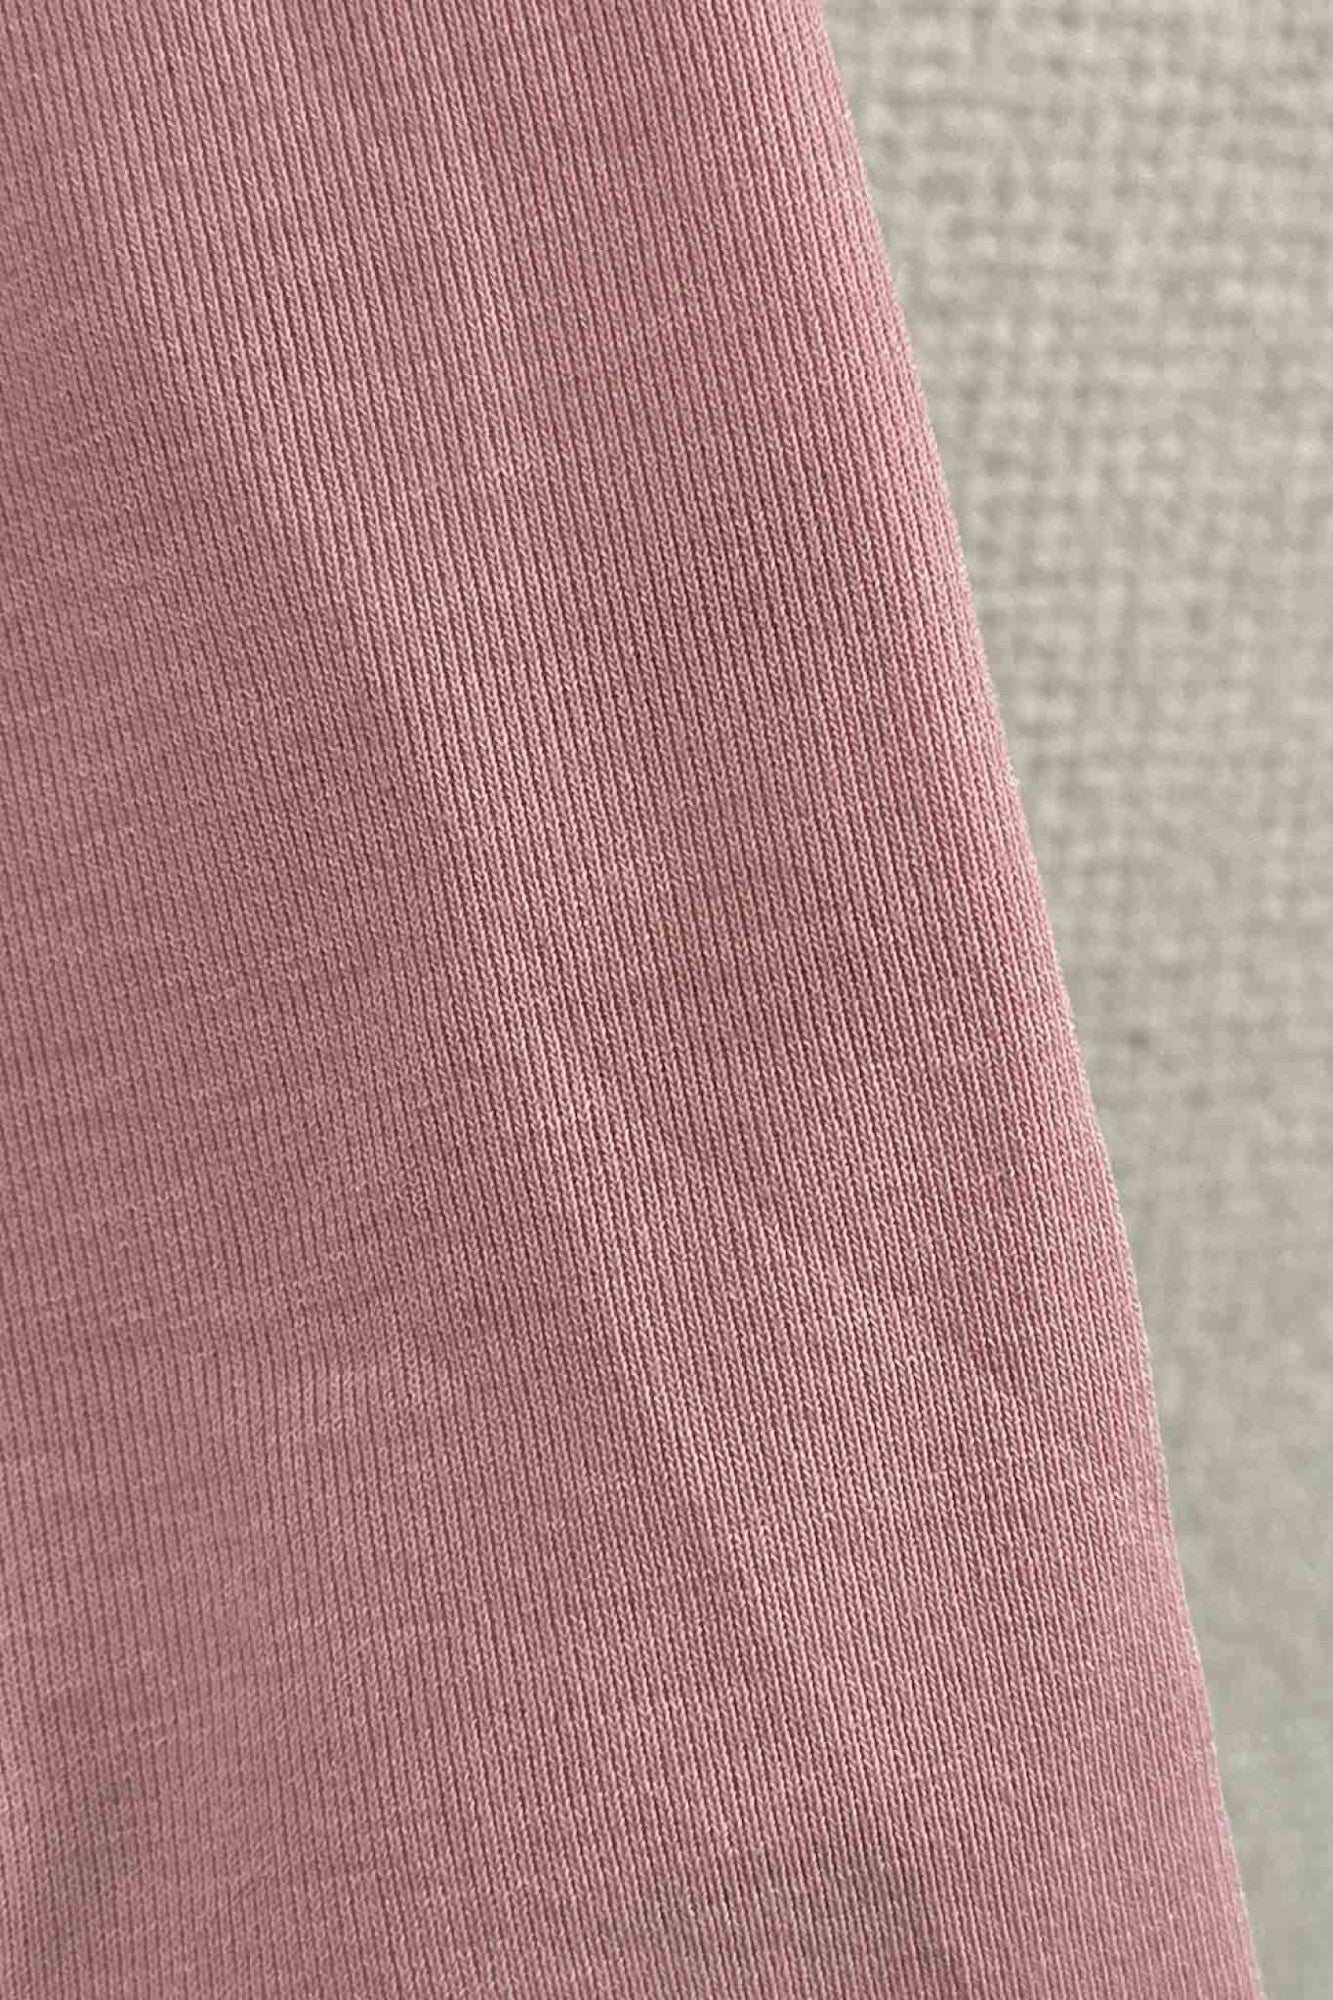 THE NORTH FACE pink long-sleeve T-shirt